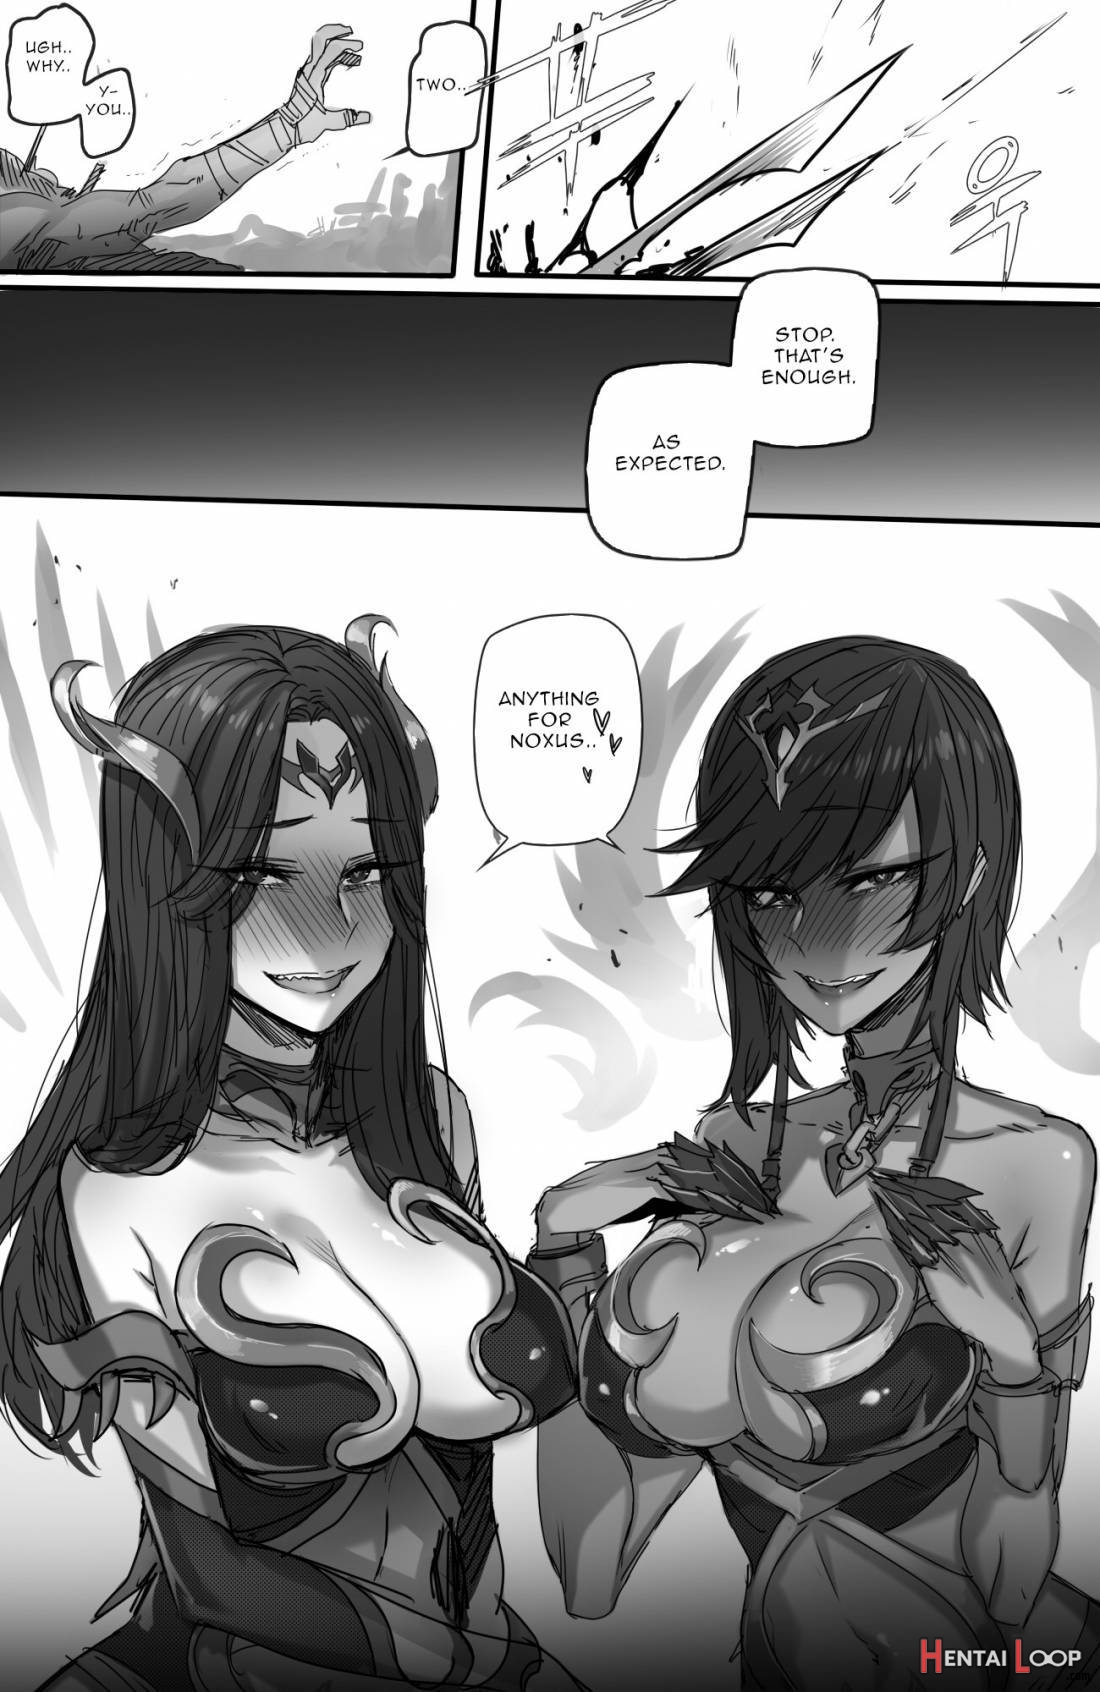 For the Noxus page 21